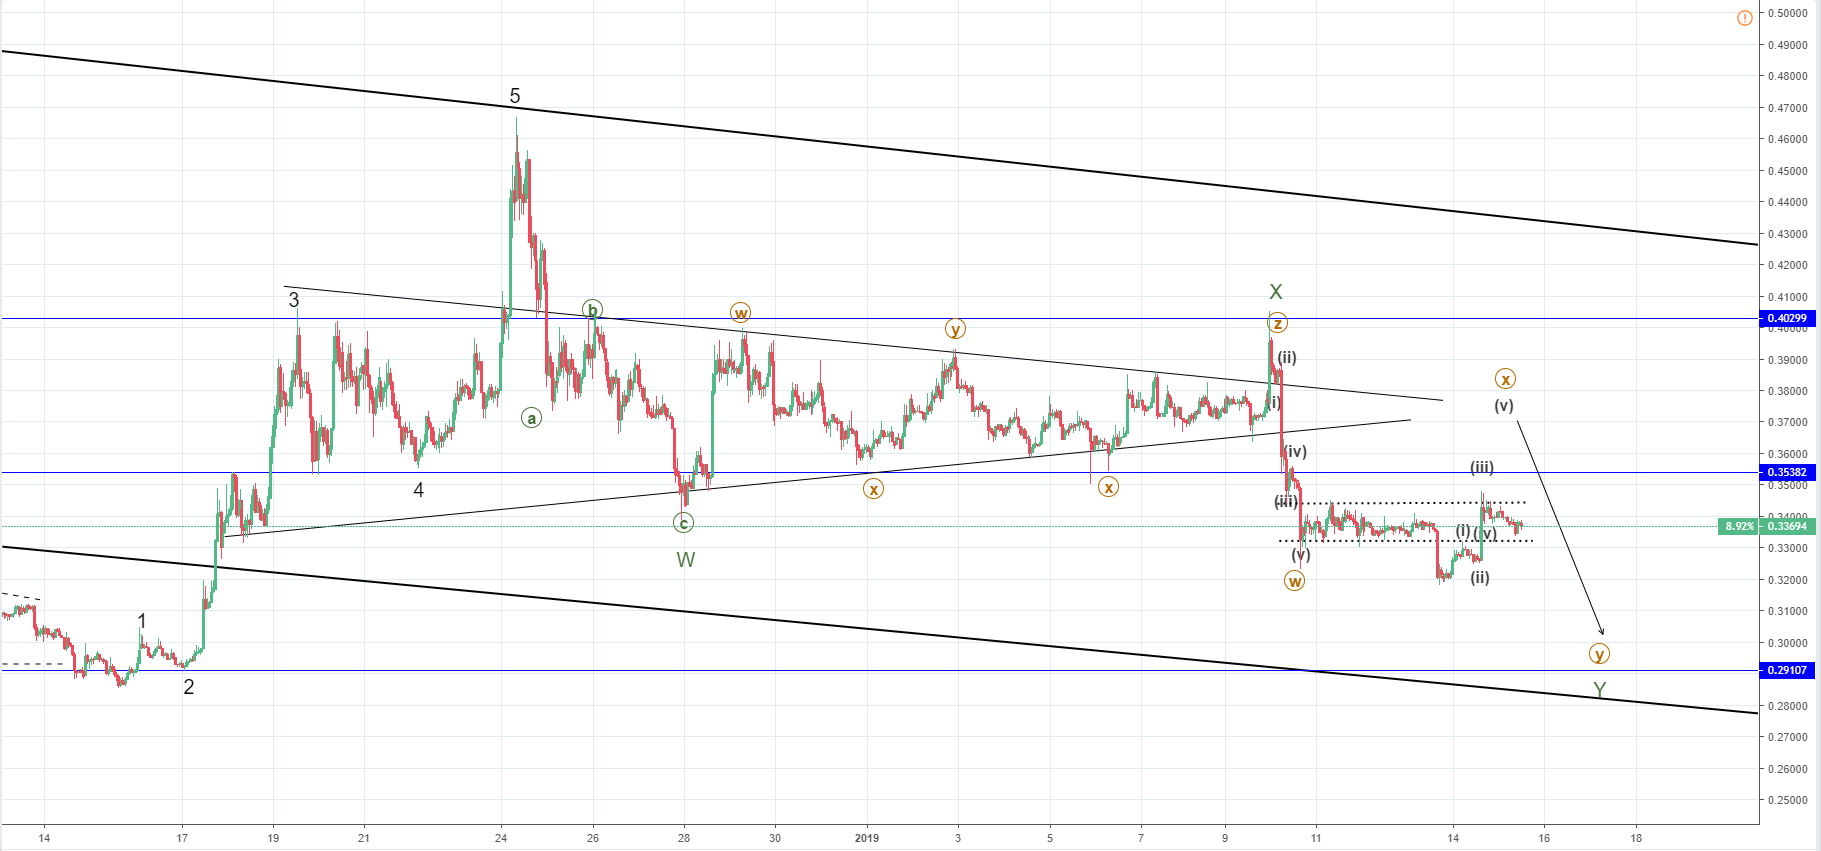 BTC/USD and XRP/USD: more upside expected